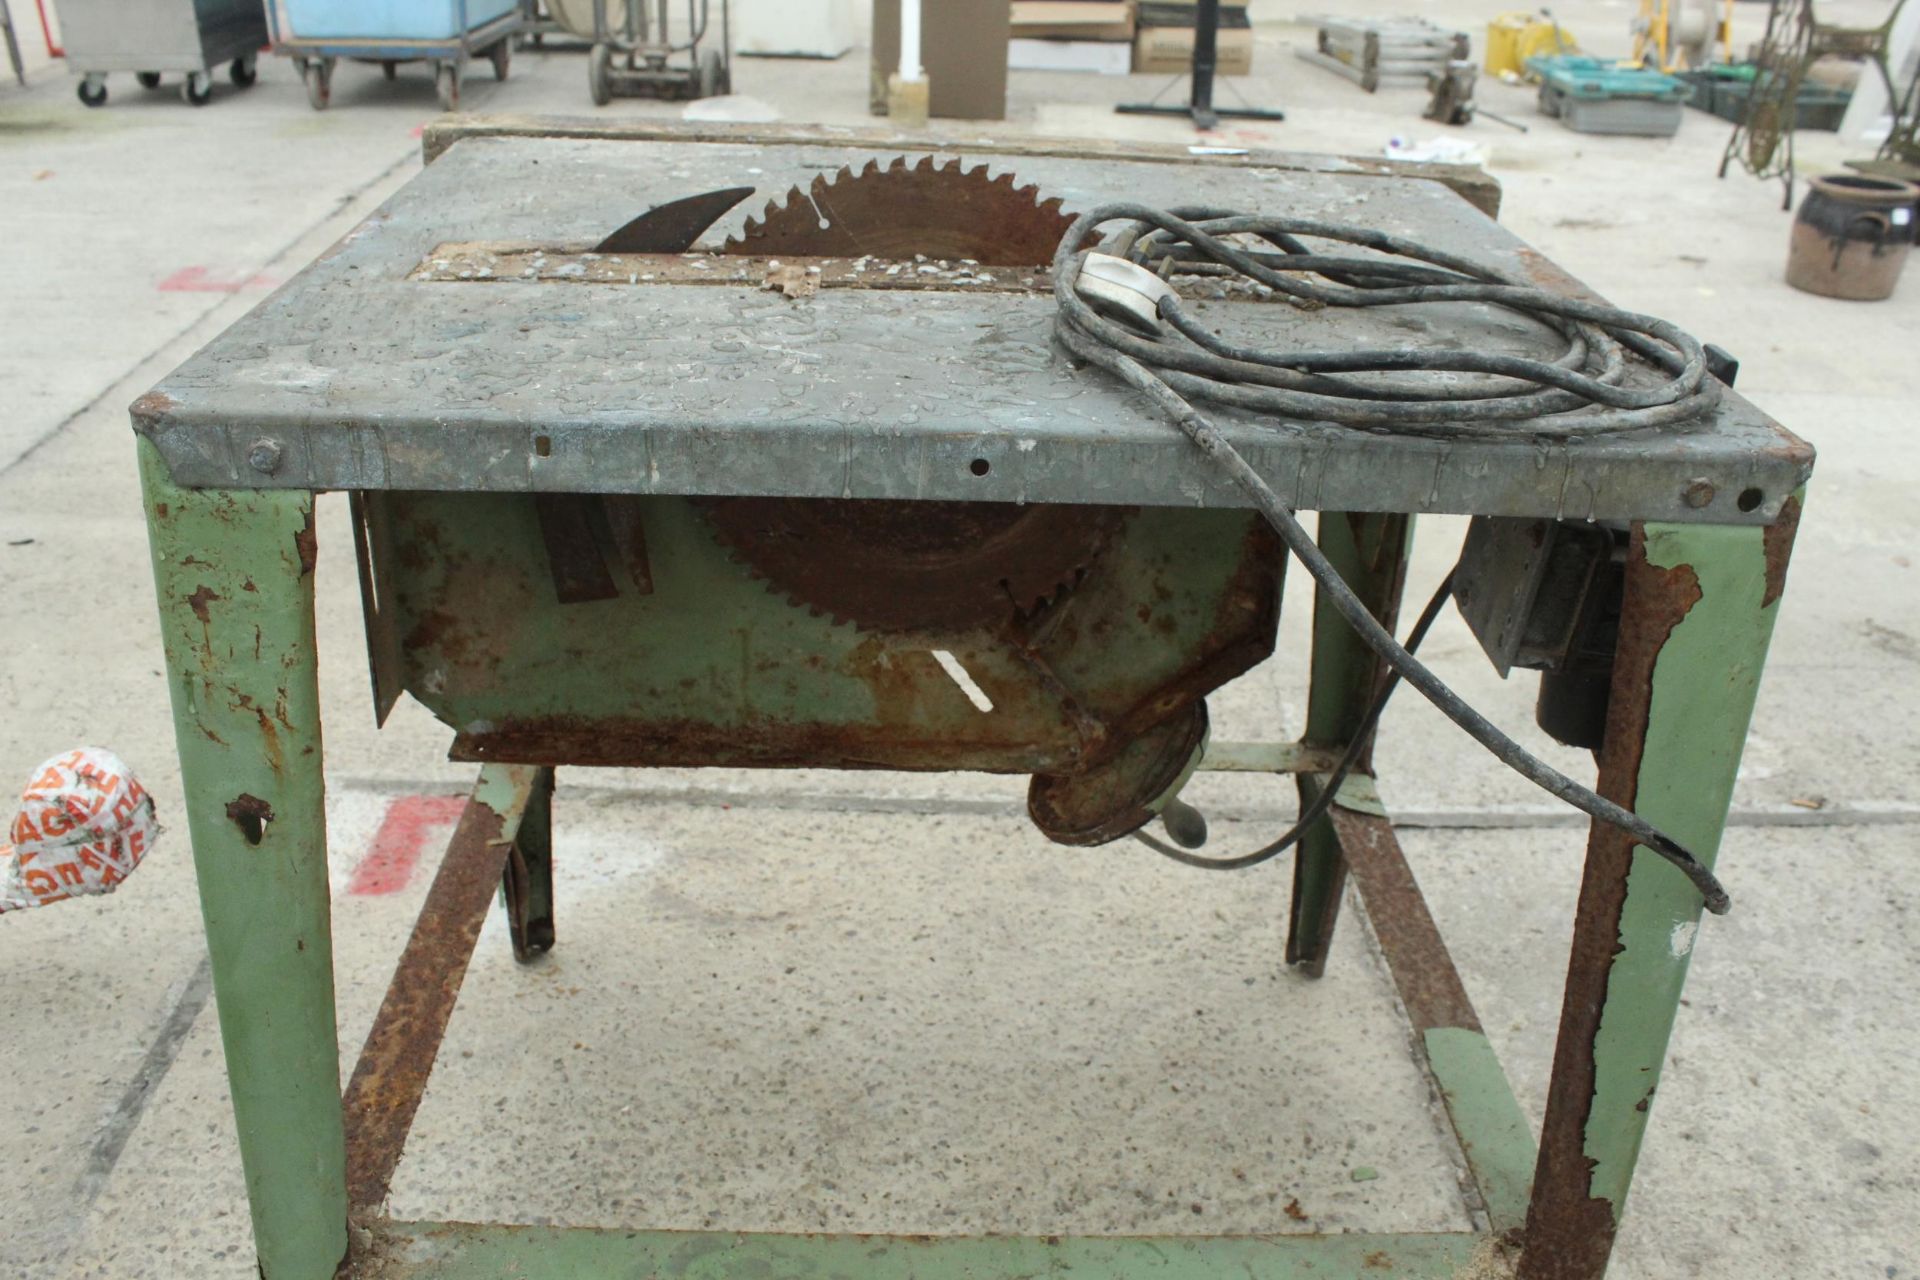 TABLE SAW 240V IN WORKING ORDER NO VAT - Image 4 of 4